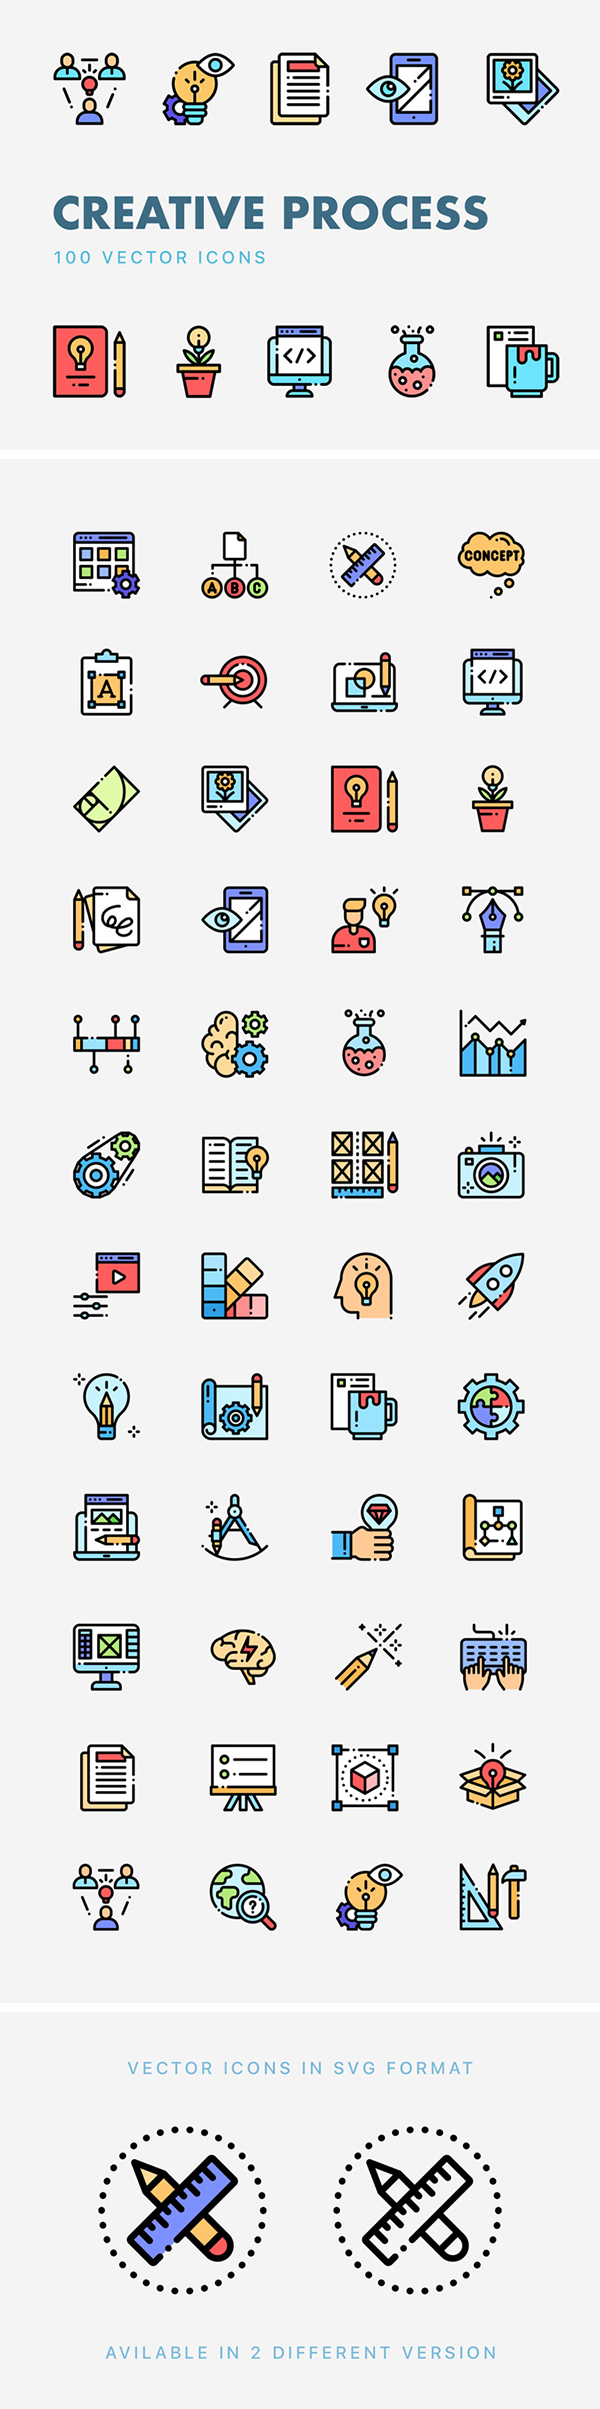 Free Creative Process Vector Icons